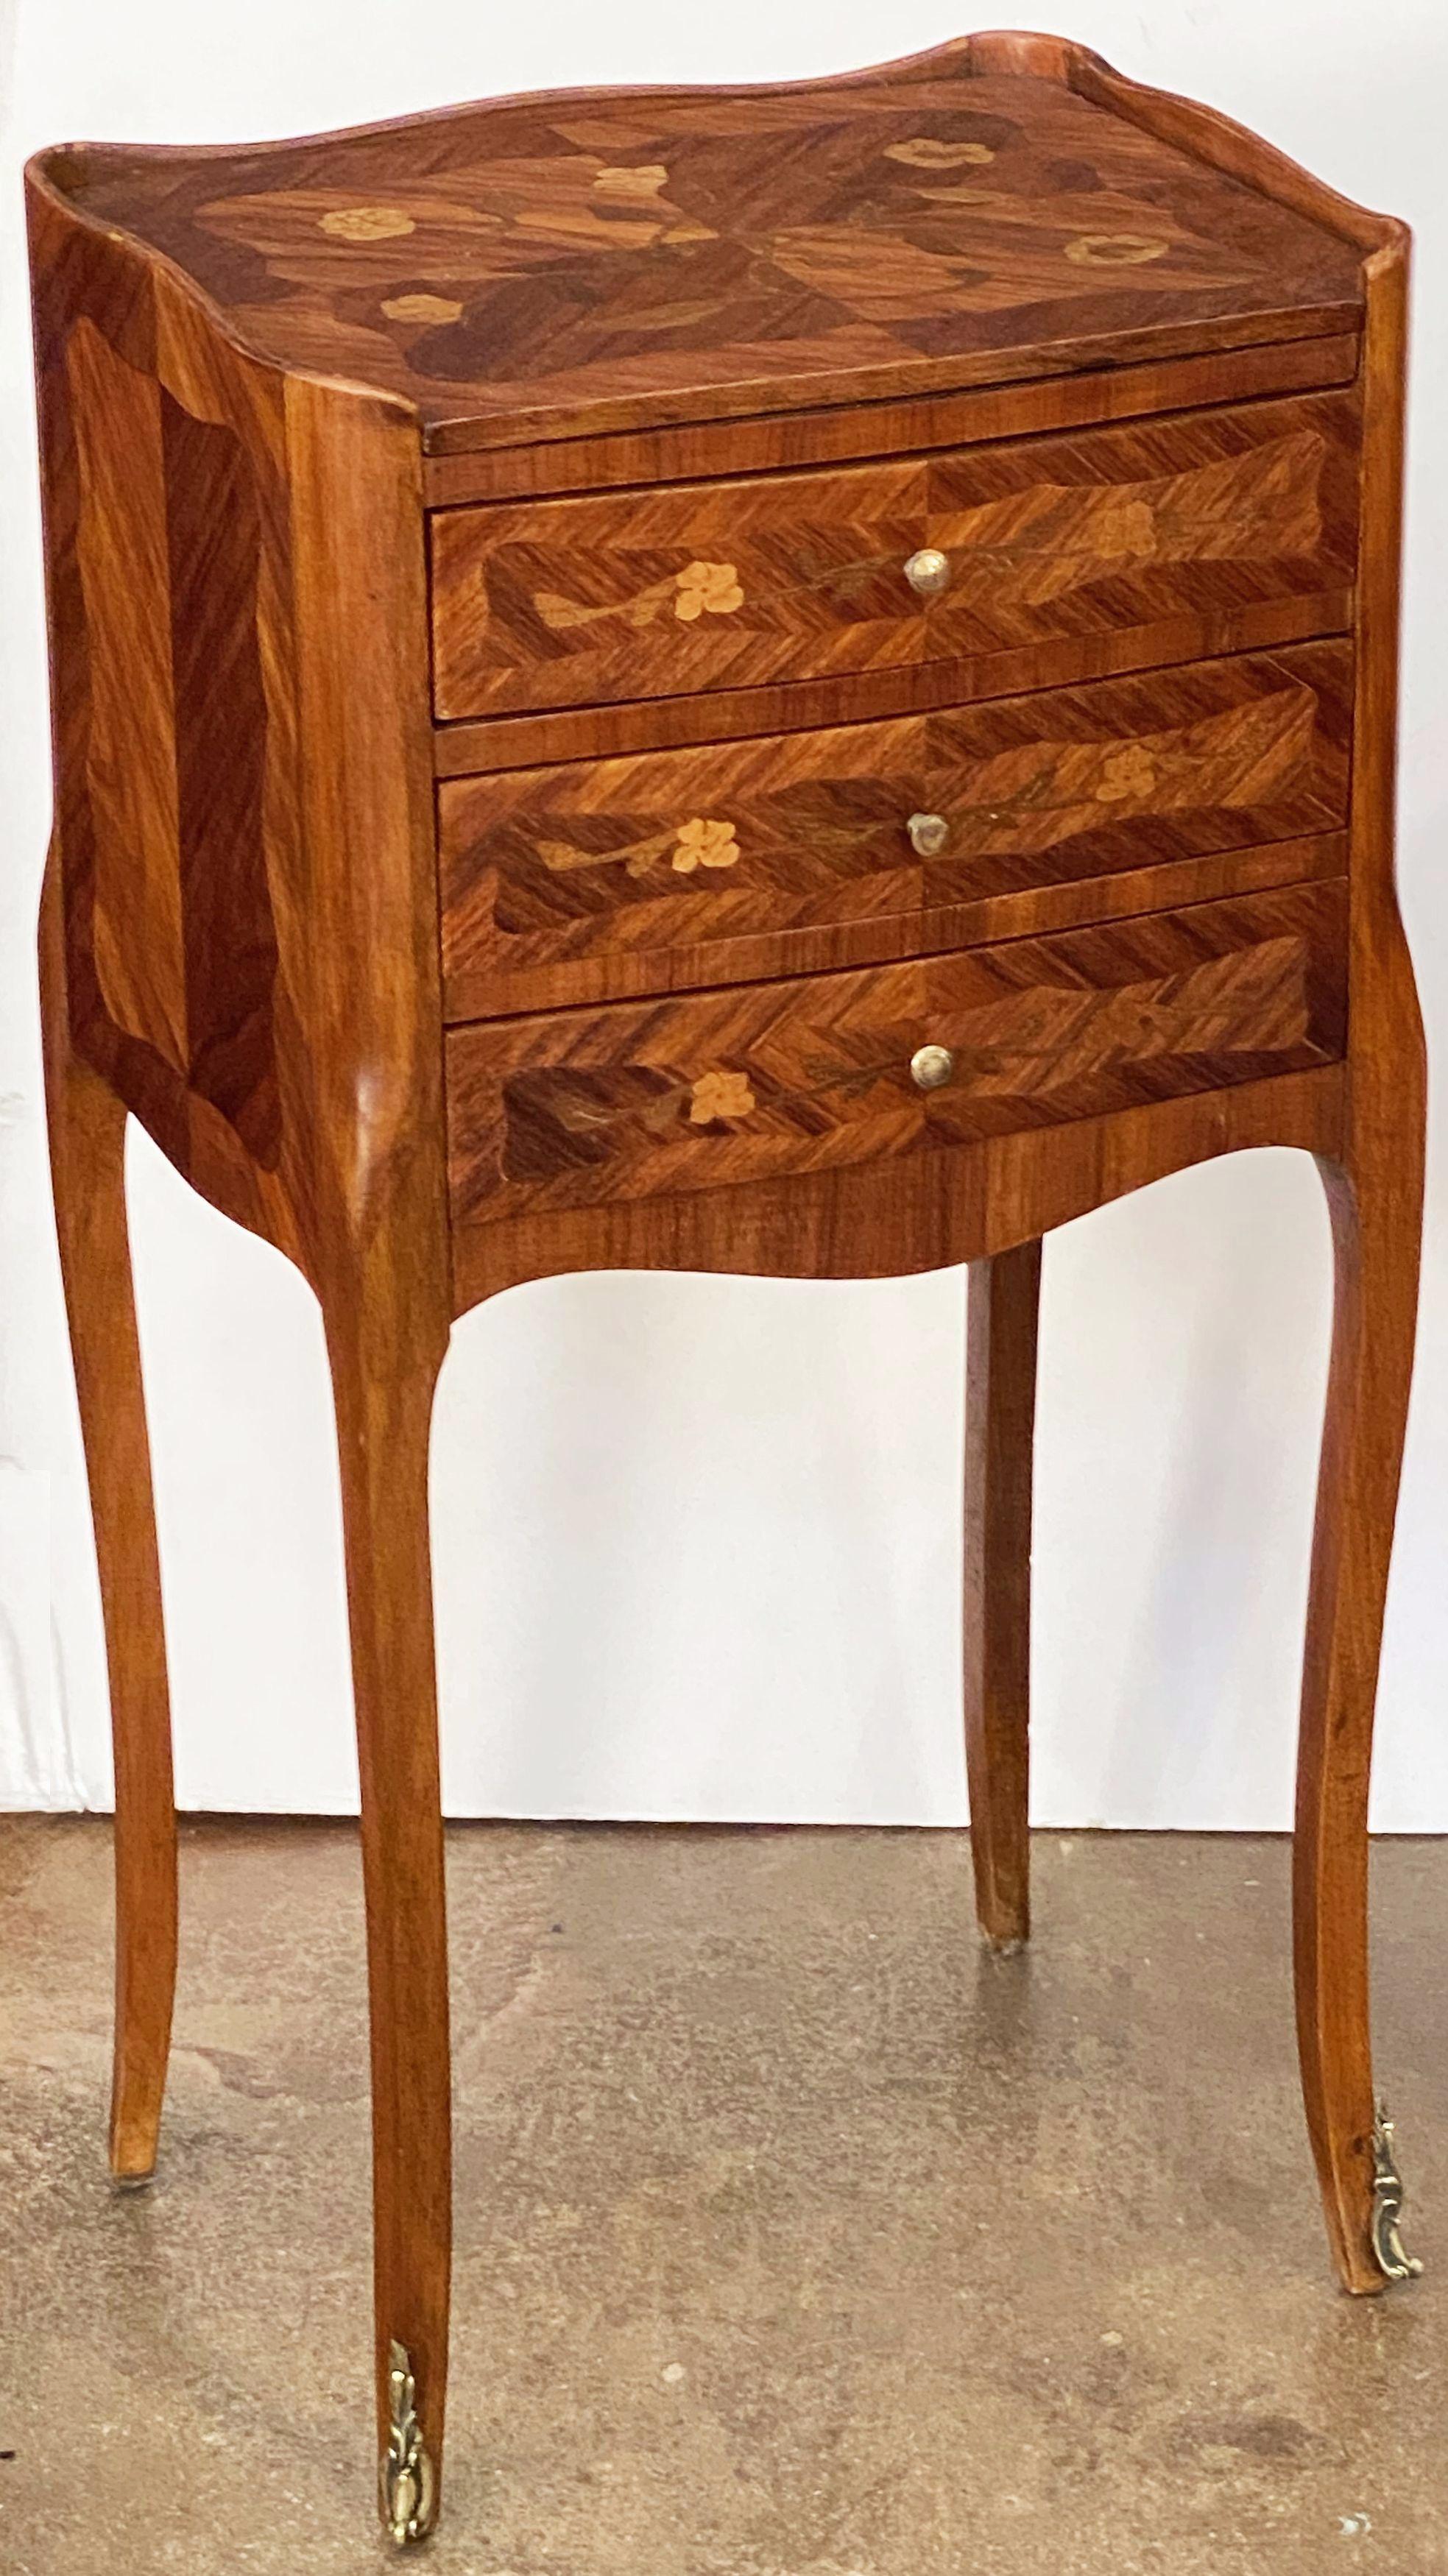 20th Century Pair of French Inlaid Bedside Tables or Nightstands on Cabriole Legs